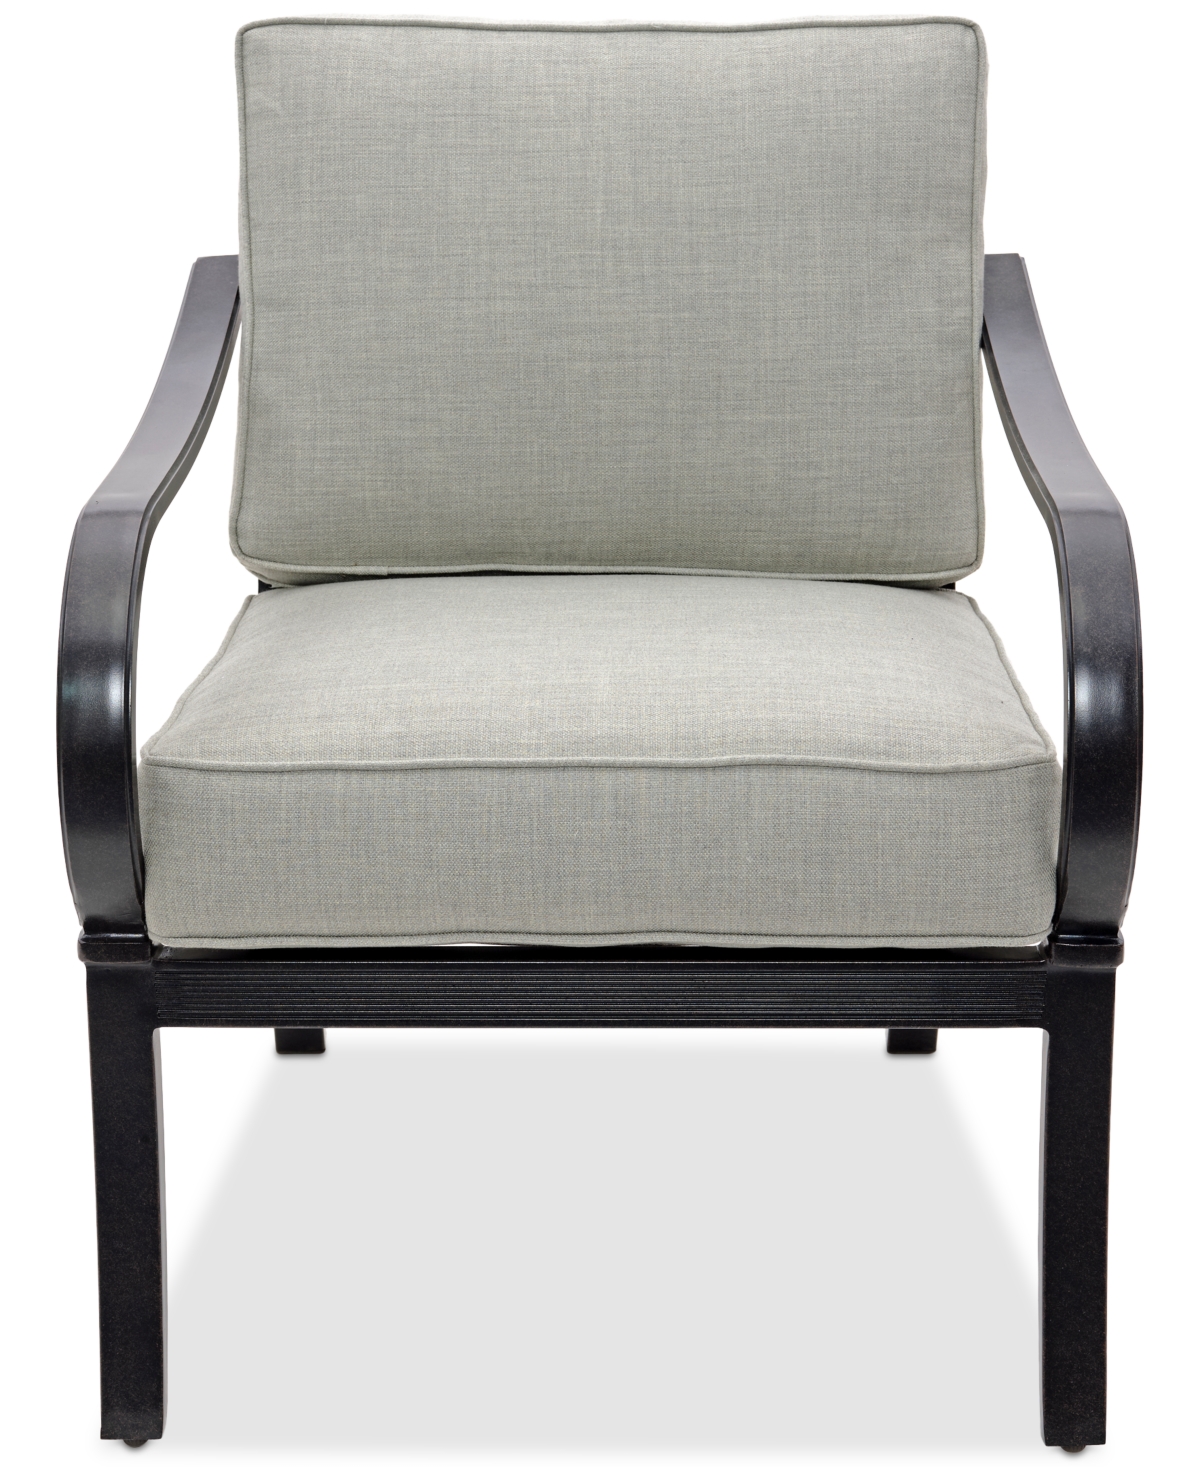 Agio St Croix Outdoor Lounge Chair In Oyster Light Grey